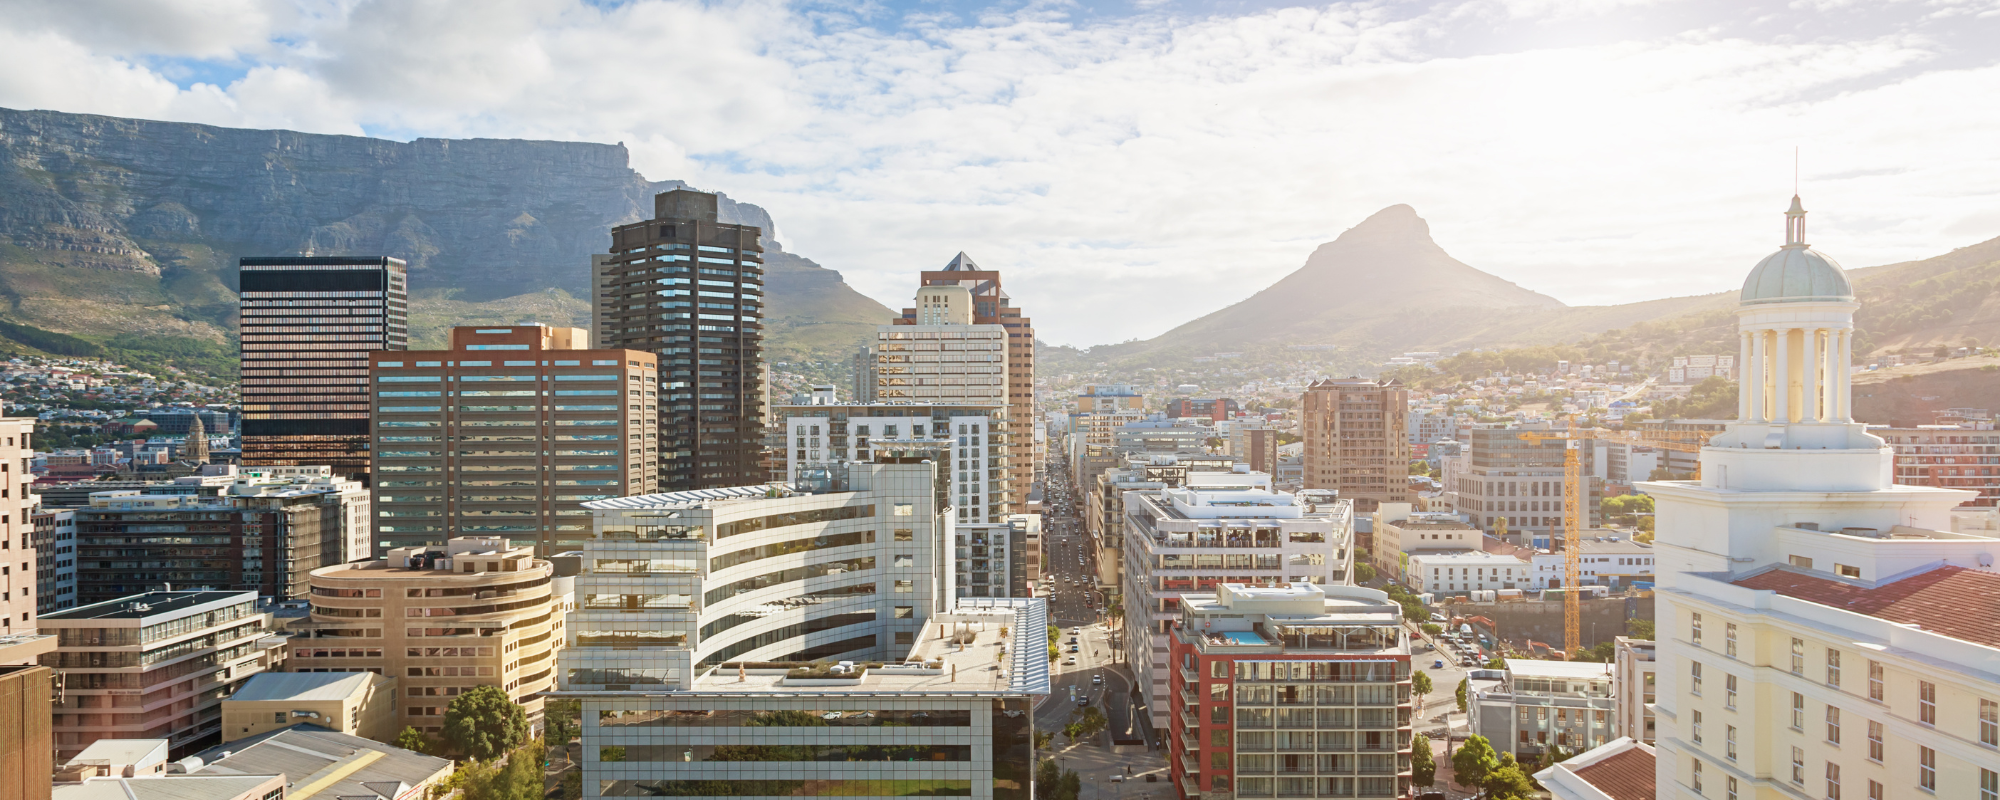 cape town outsourcing destination south africa